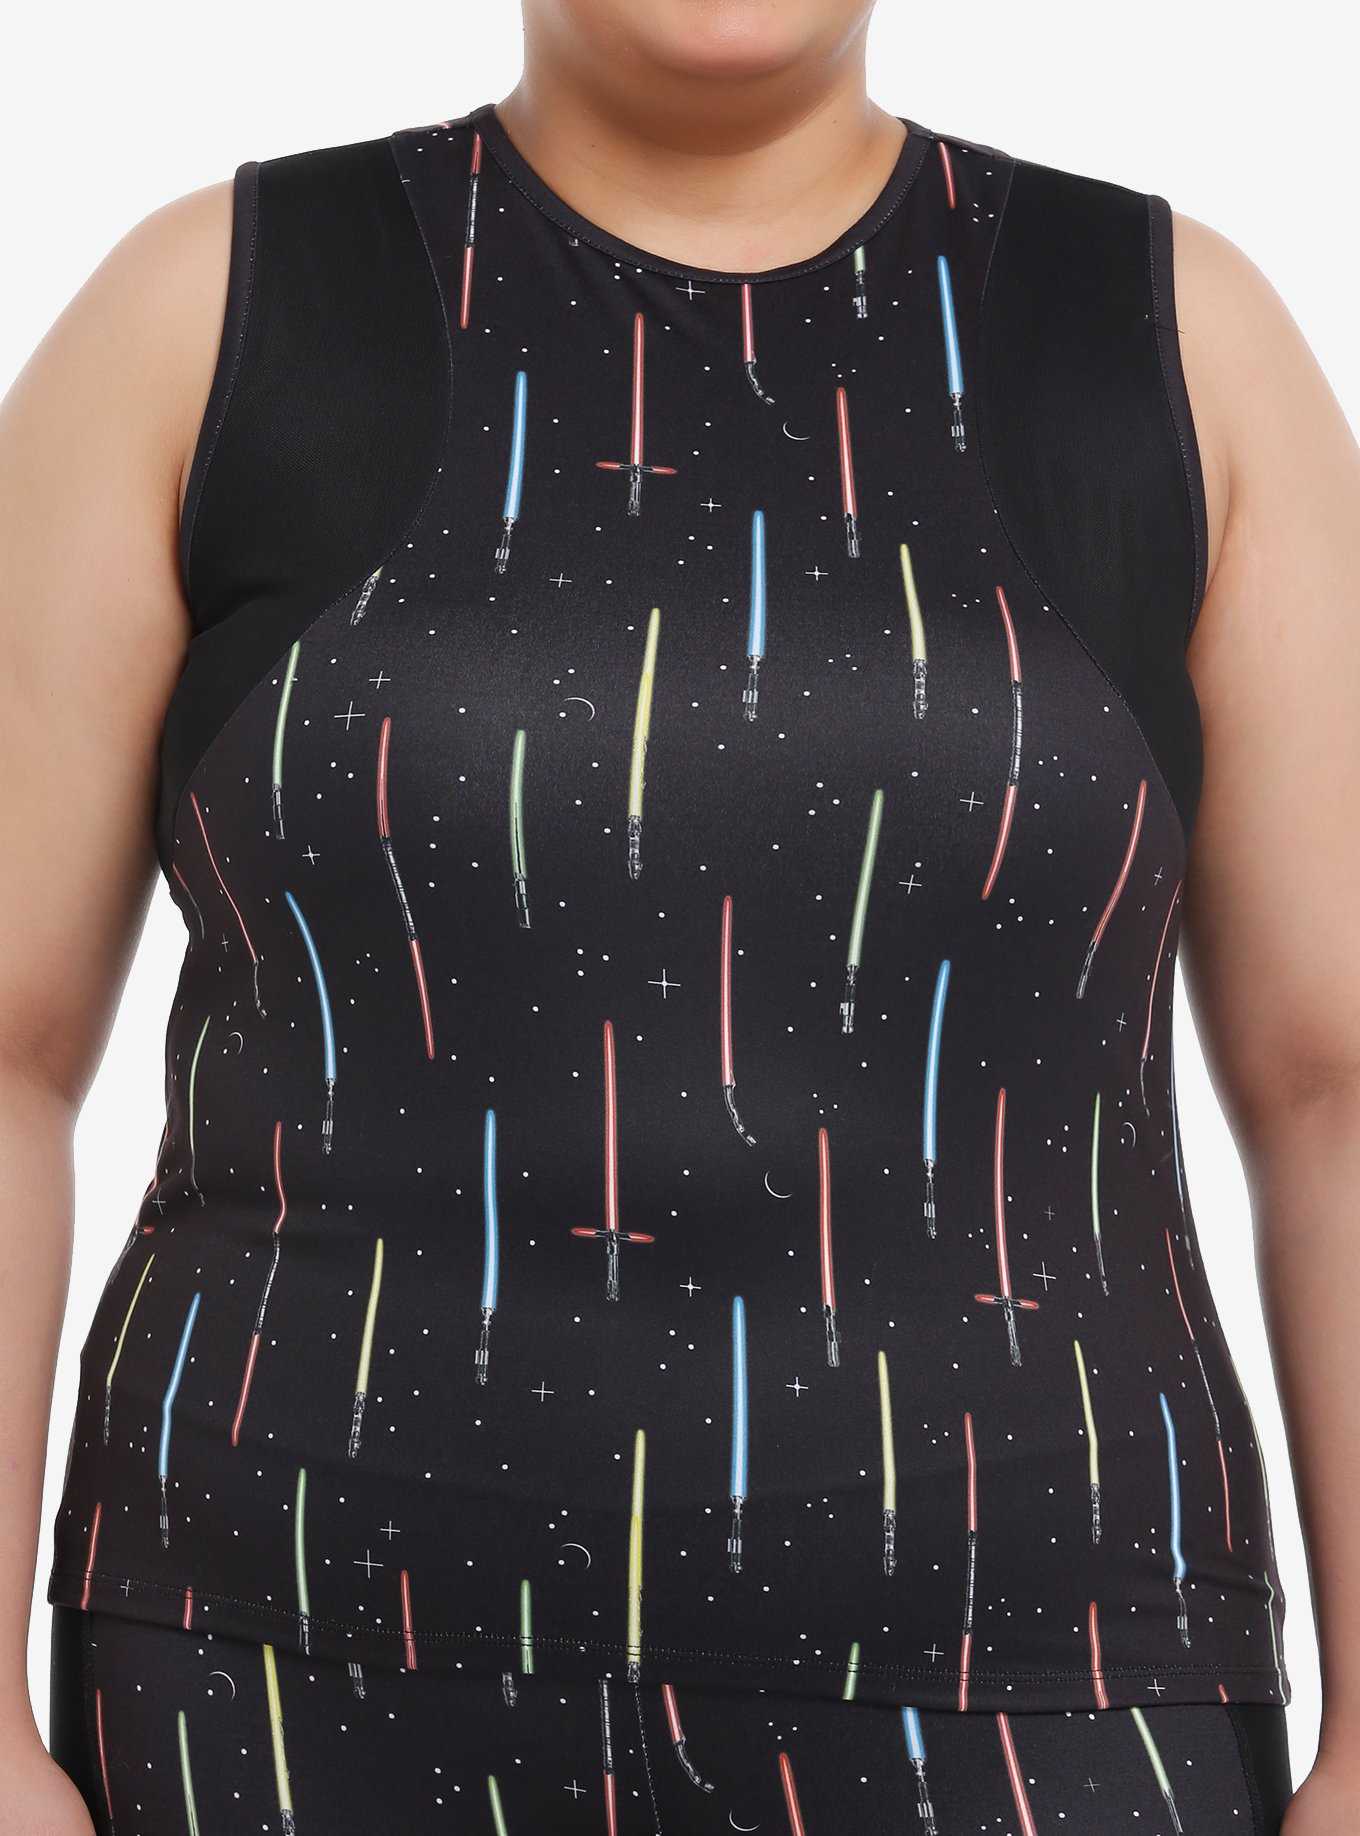 Her Universe Star Wars Lightsabers Active Tank Top Plus Size Her Universe Exclusive, , hi-res